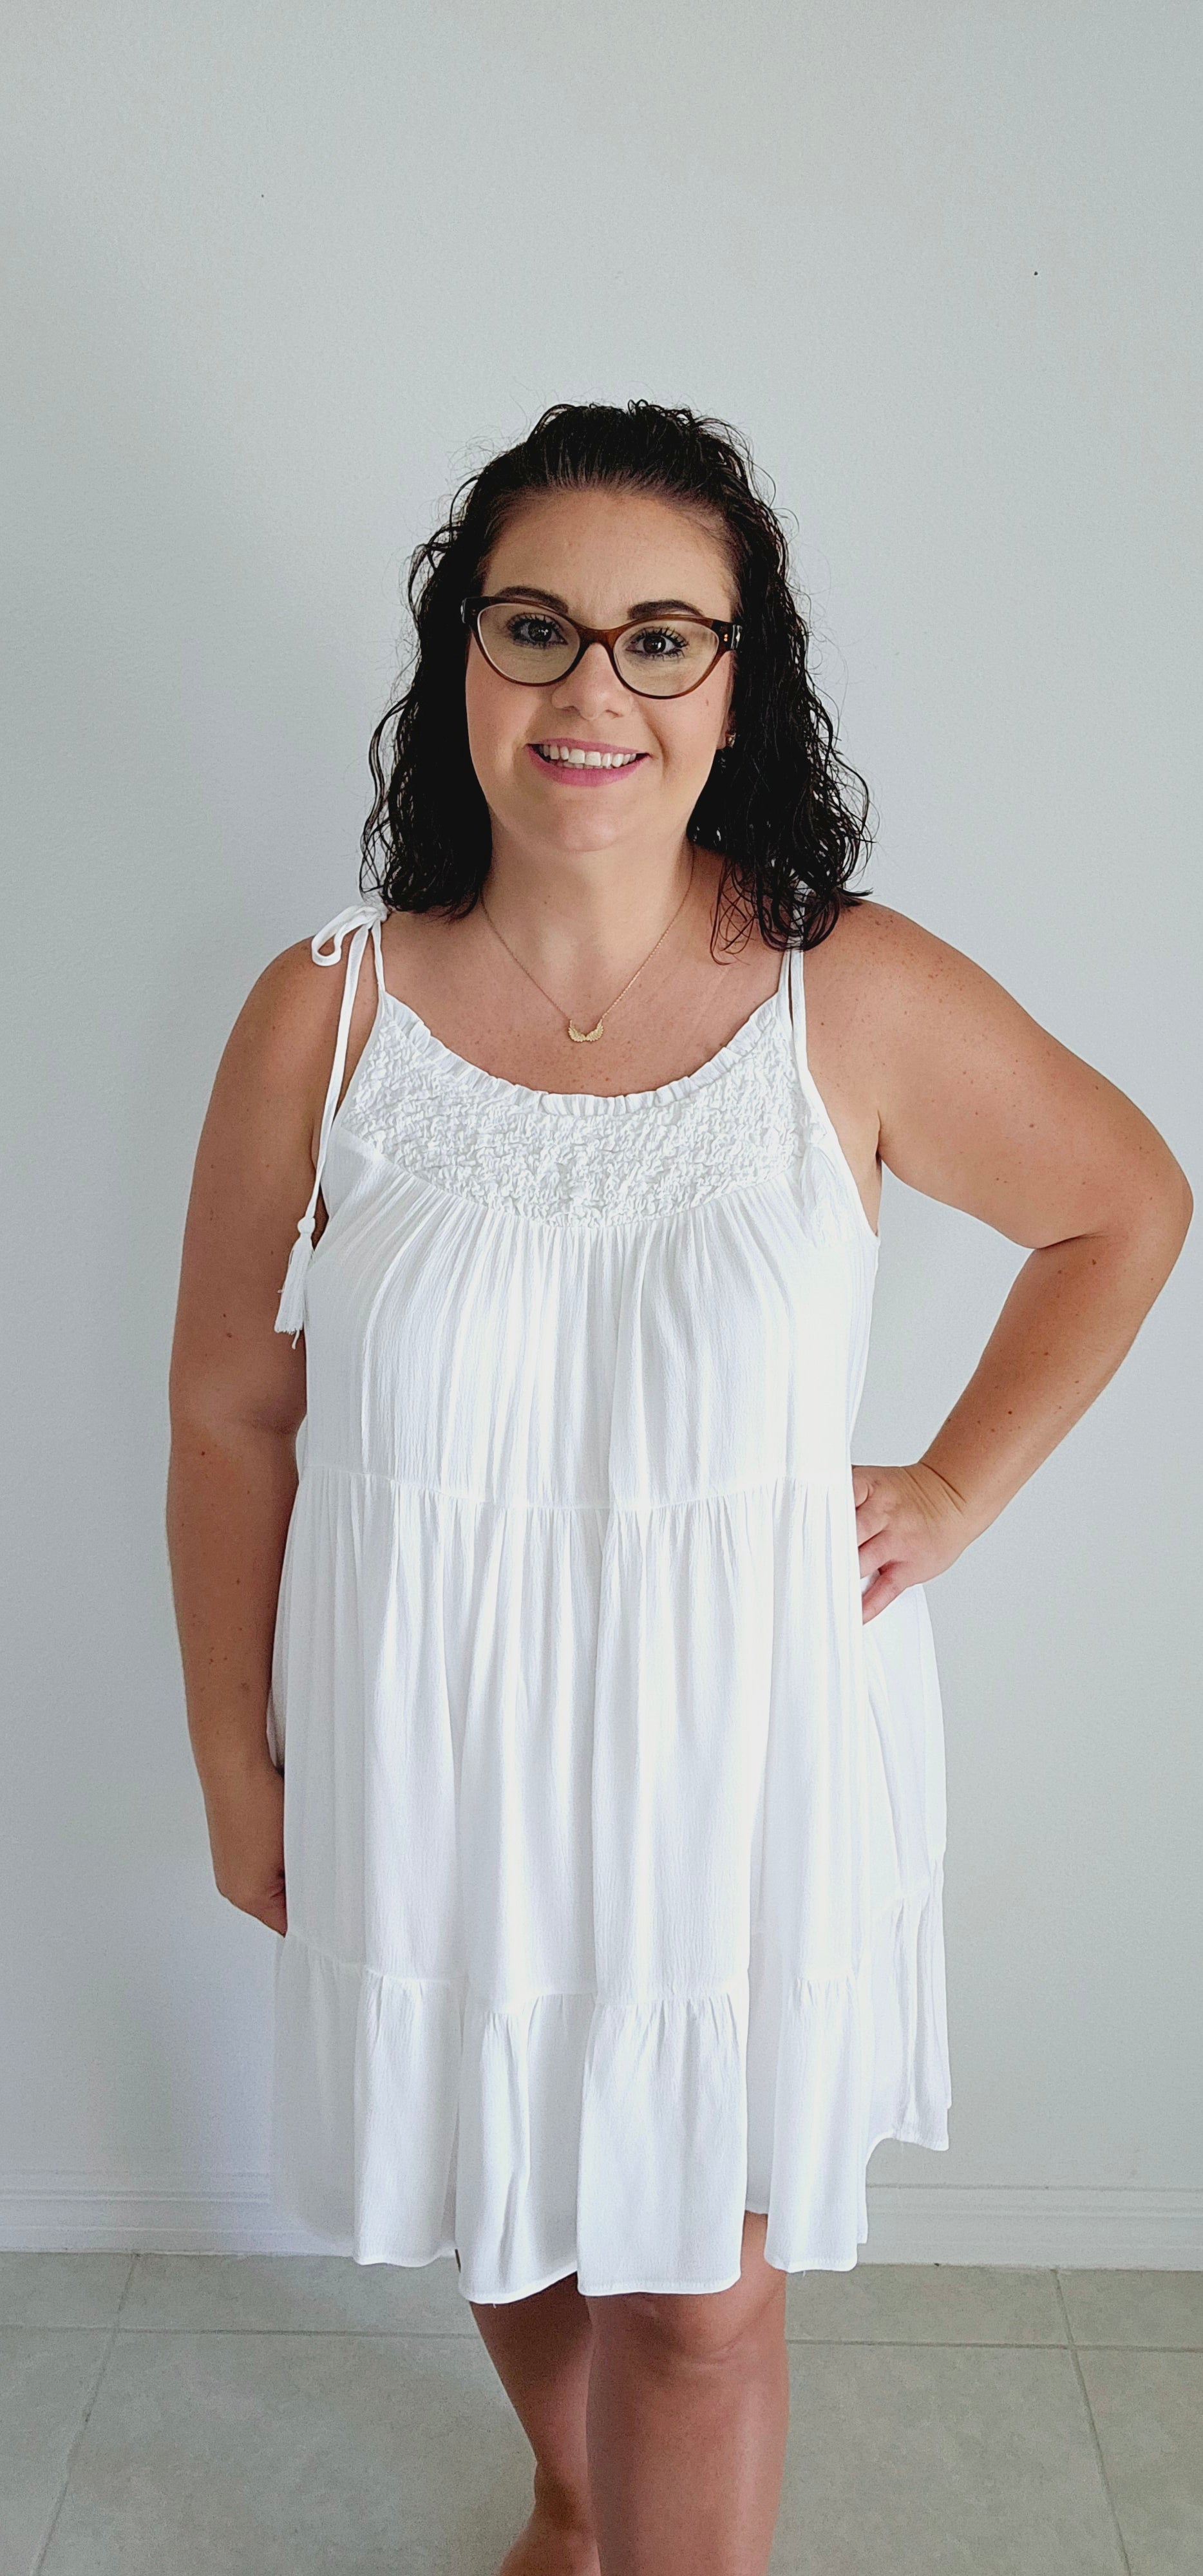 Get ready to make a statement with this flirty mini dress. Featuring a unique popcorn smocking chest and playful tassel detail straps, this dress is perfect for those vacation vibes. The tiered mini length adds a touch of fun and flirty to your look. Bring on the sun! Sizes small through large.